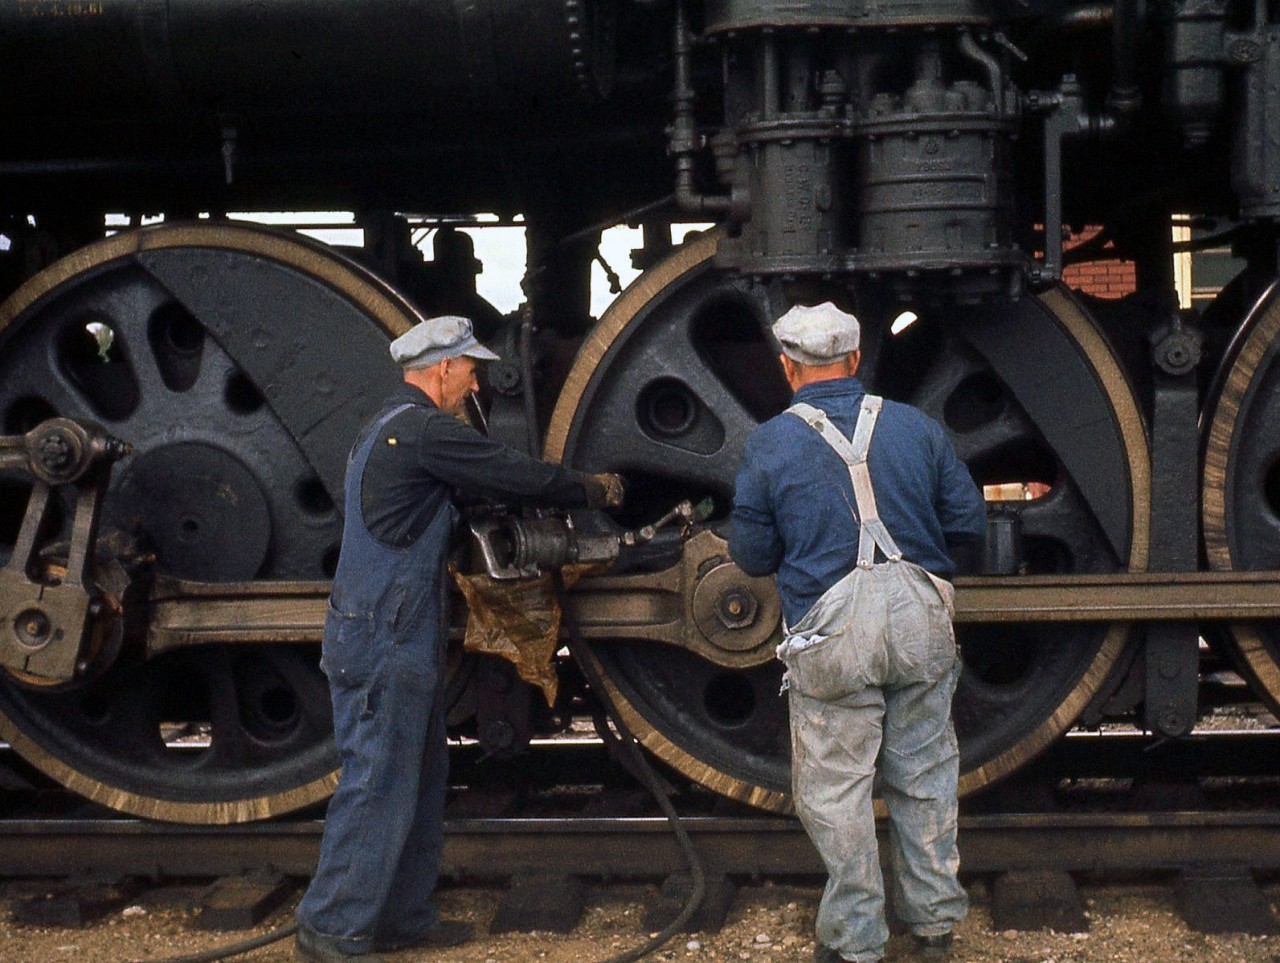 Bygone practice: the crew of Canadian National "Northern" 4-8-4 6167 attend to her drivers with grease guns and oil cans, lubricating bearings, rods and moving parts on the steam engine while stopped at Lindsay, Ontario on an excursion run.  According to Branchline magazine, this was the first winter steam excursion operated by the Upper Canada Railway Society, running from Toronto to Lindsay (via Blackwater Jct, on the Uxbridge Sub) on January 28th 1962.  Note: geotagged location not exact.